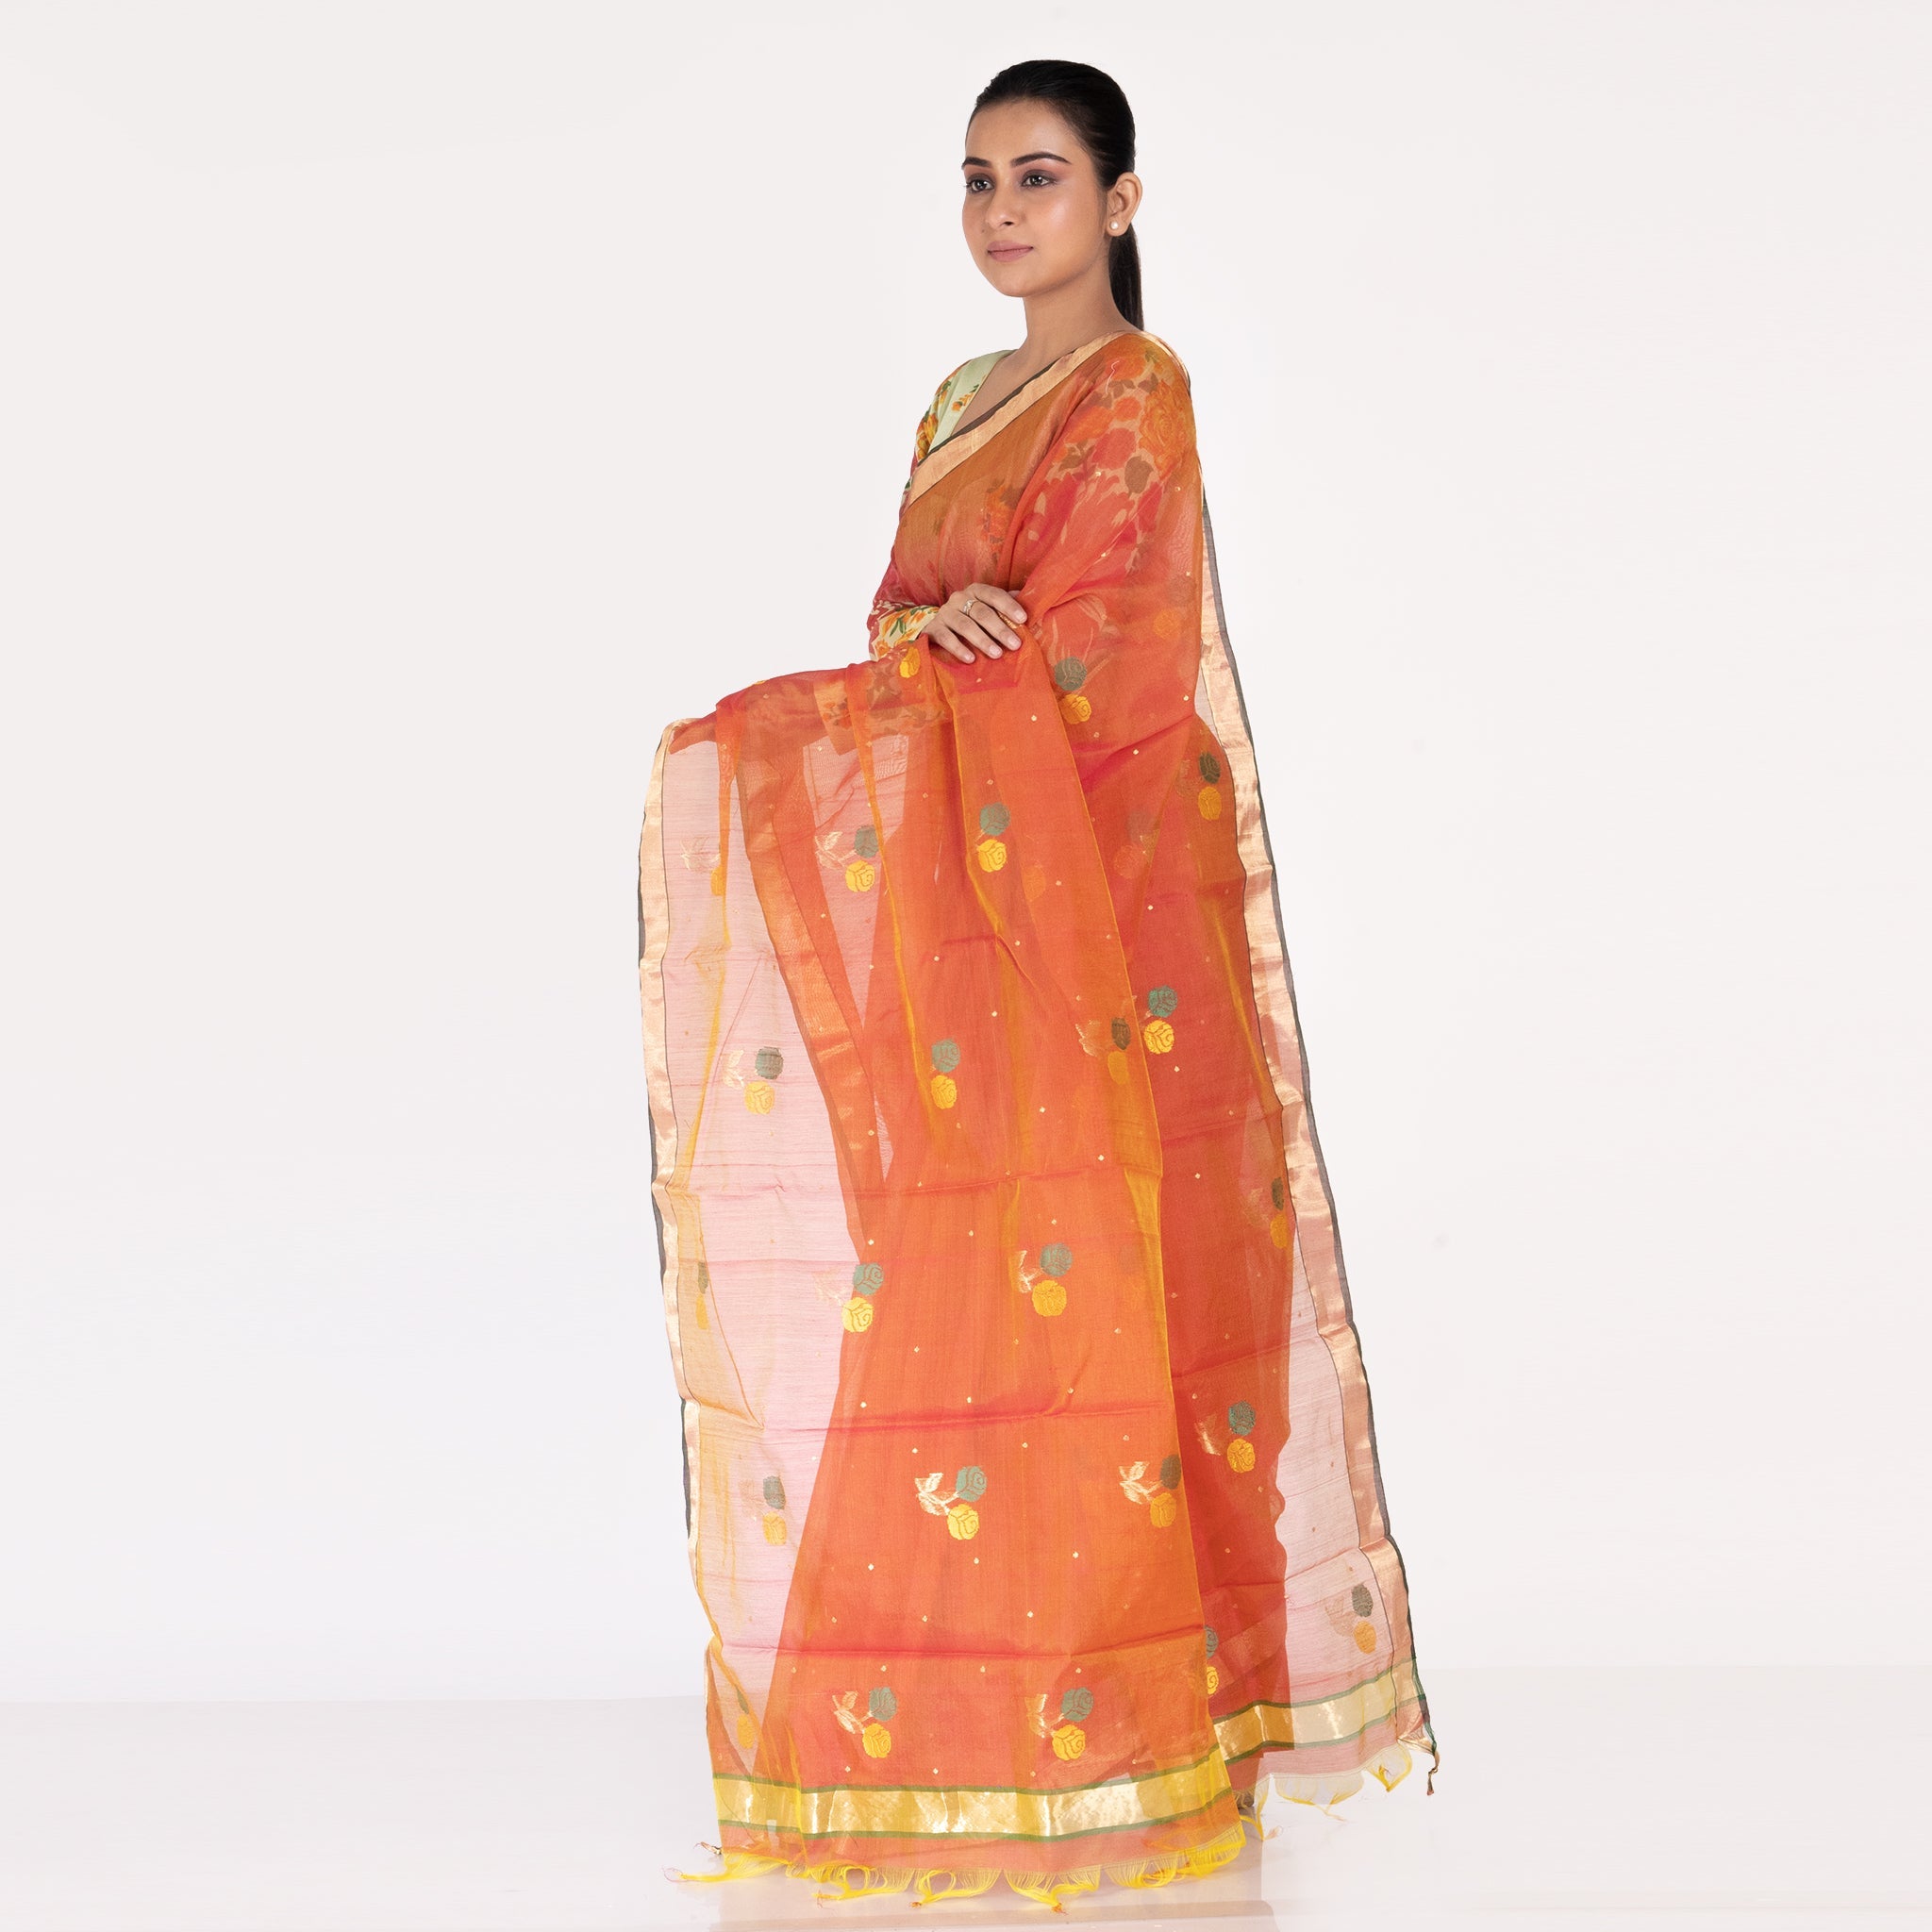 Women's Rust Pure Chanderi Silk Saree With Floral Motifs And Border Pallu - Boveee